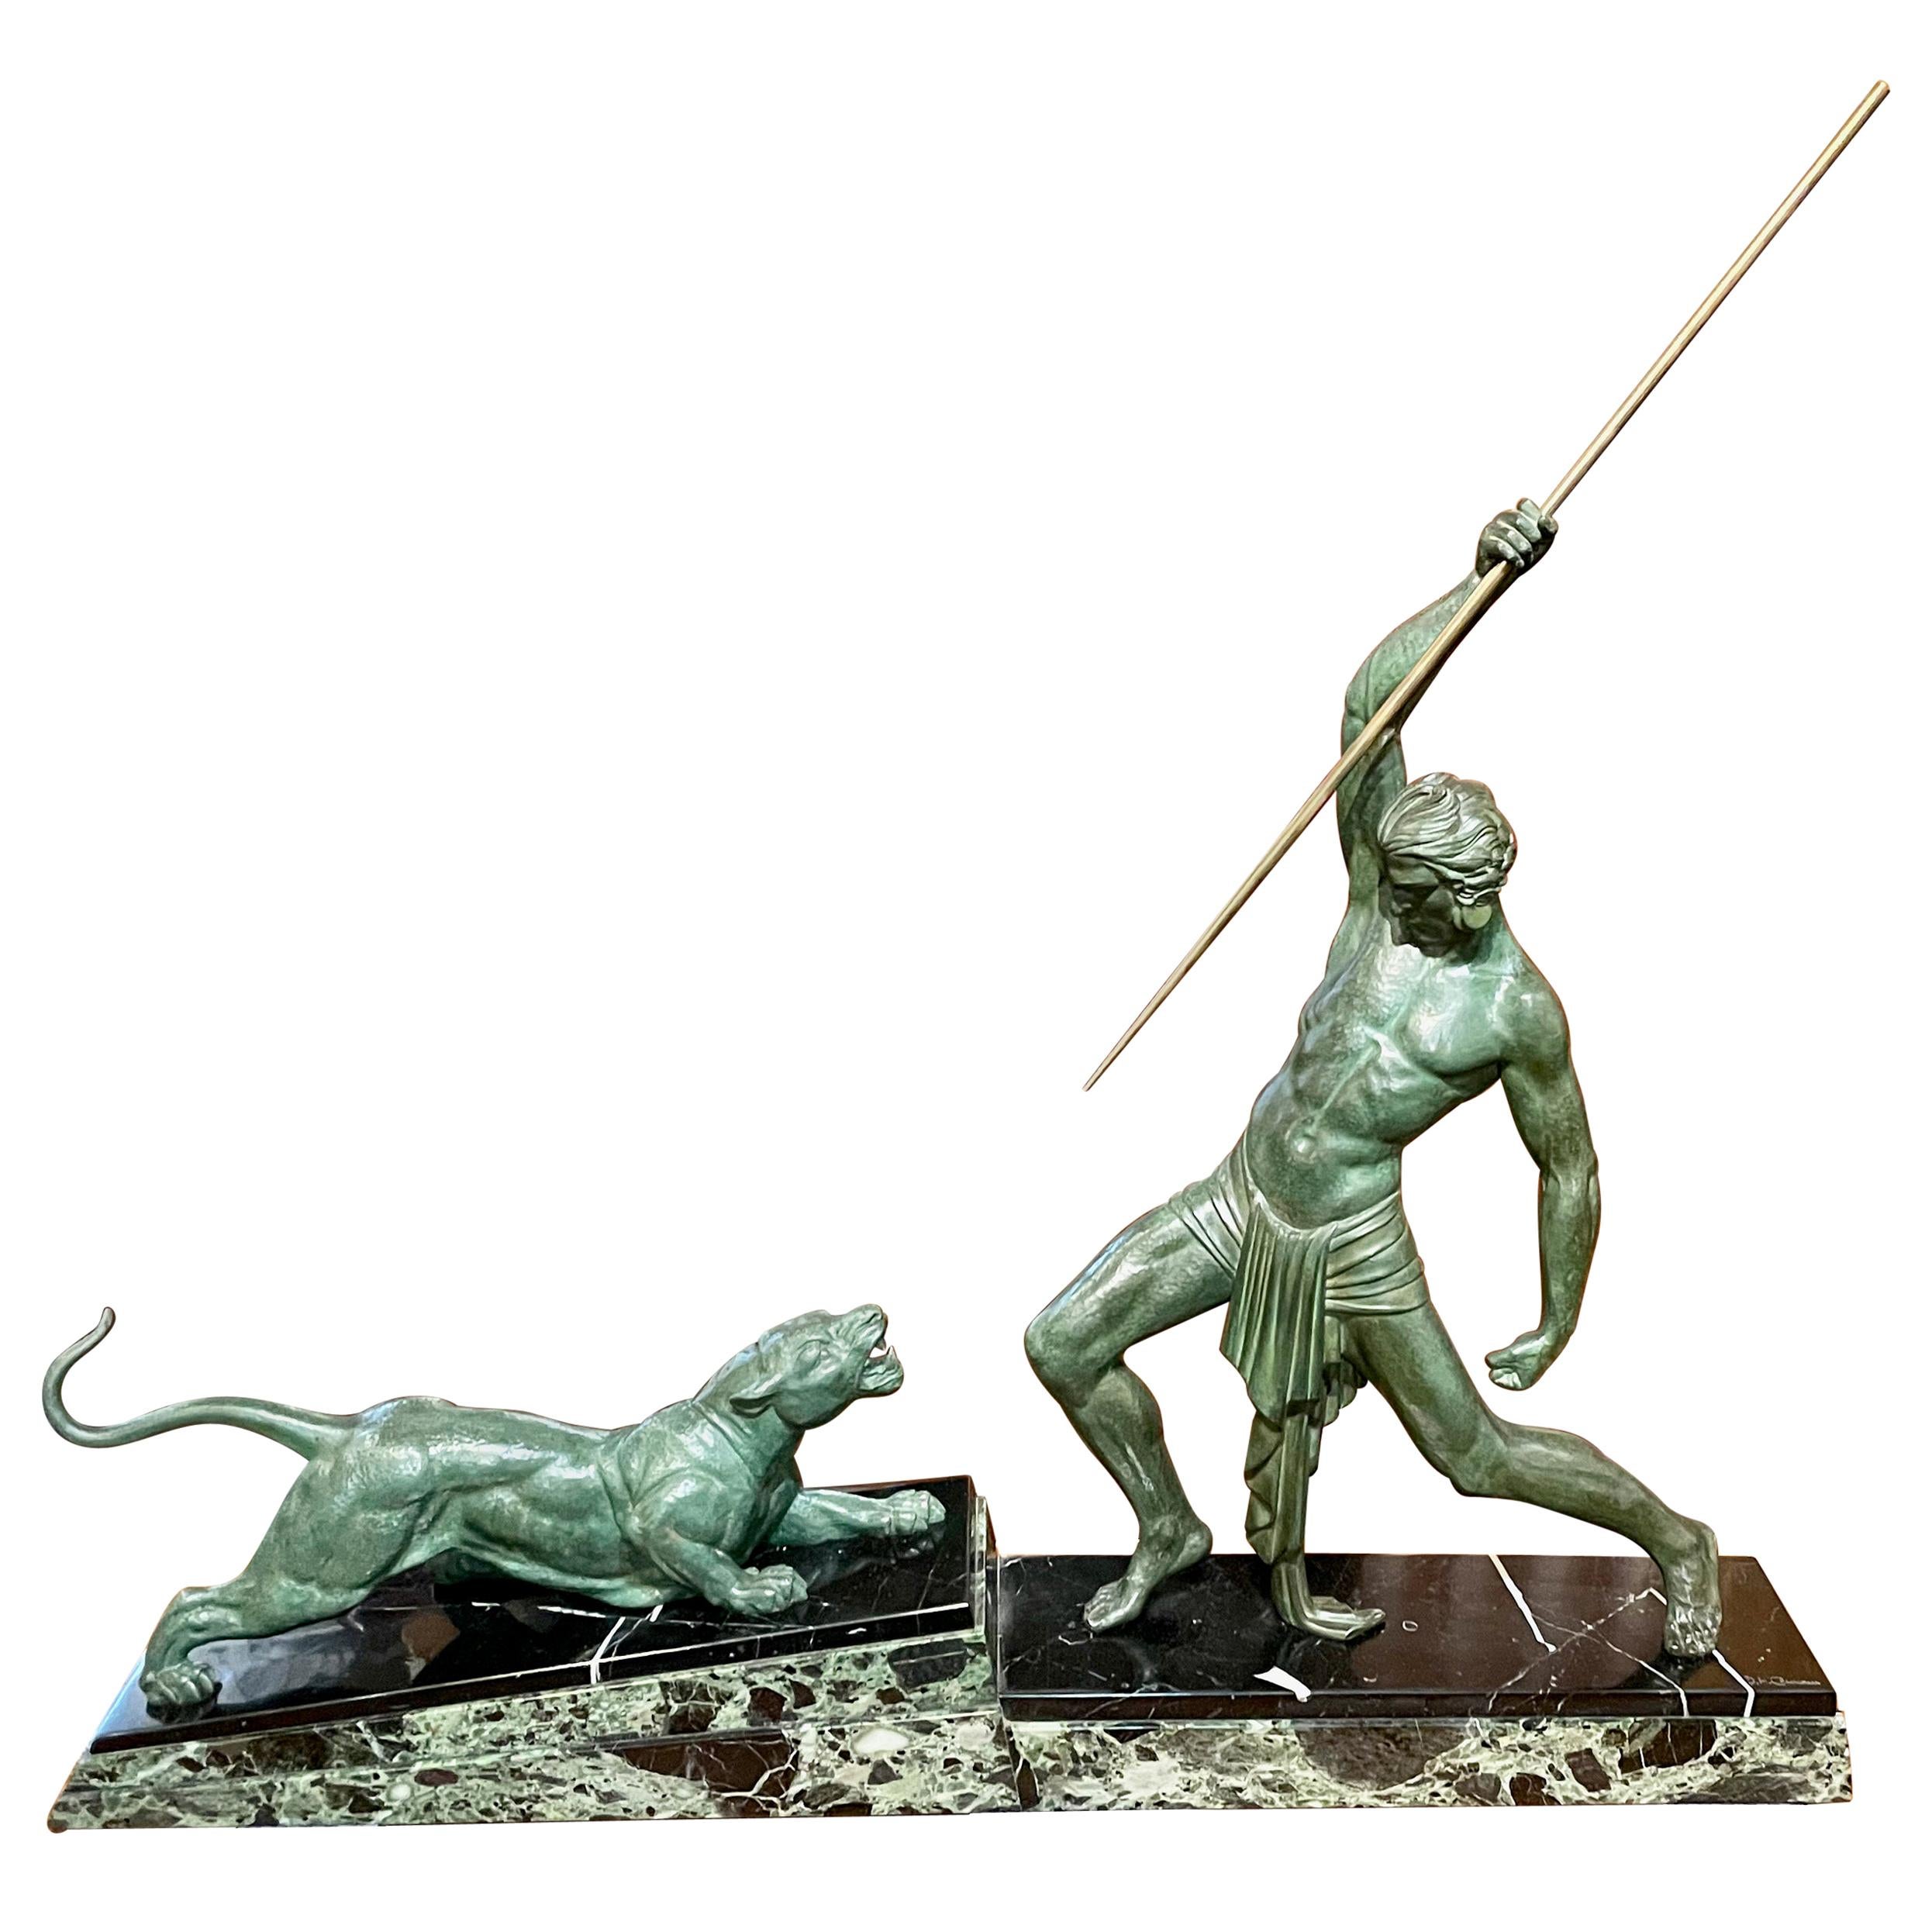 Chiparus 'The Hunter' Large Art Deco Sculpture with Panther, 1930